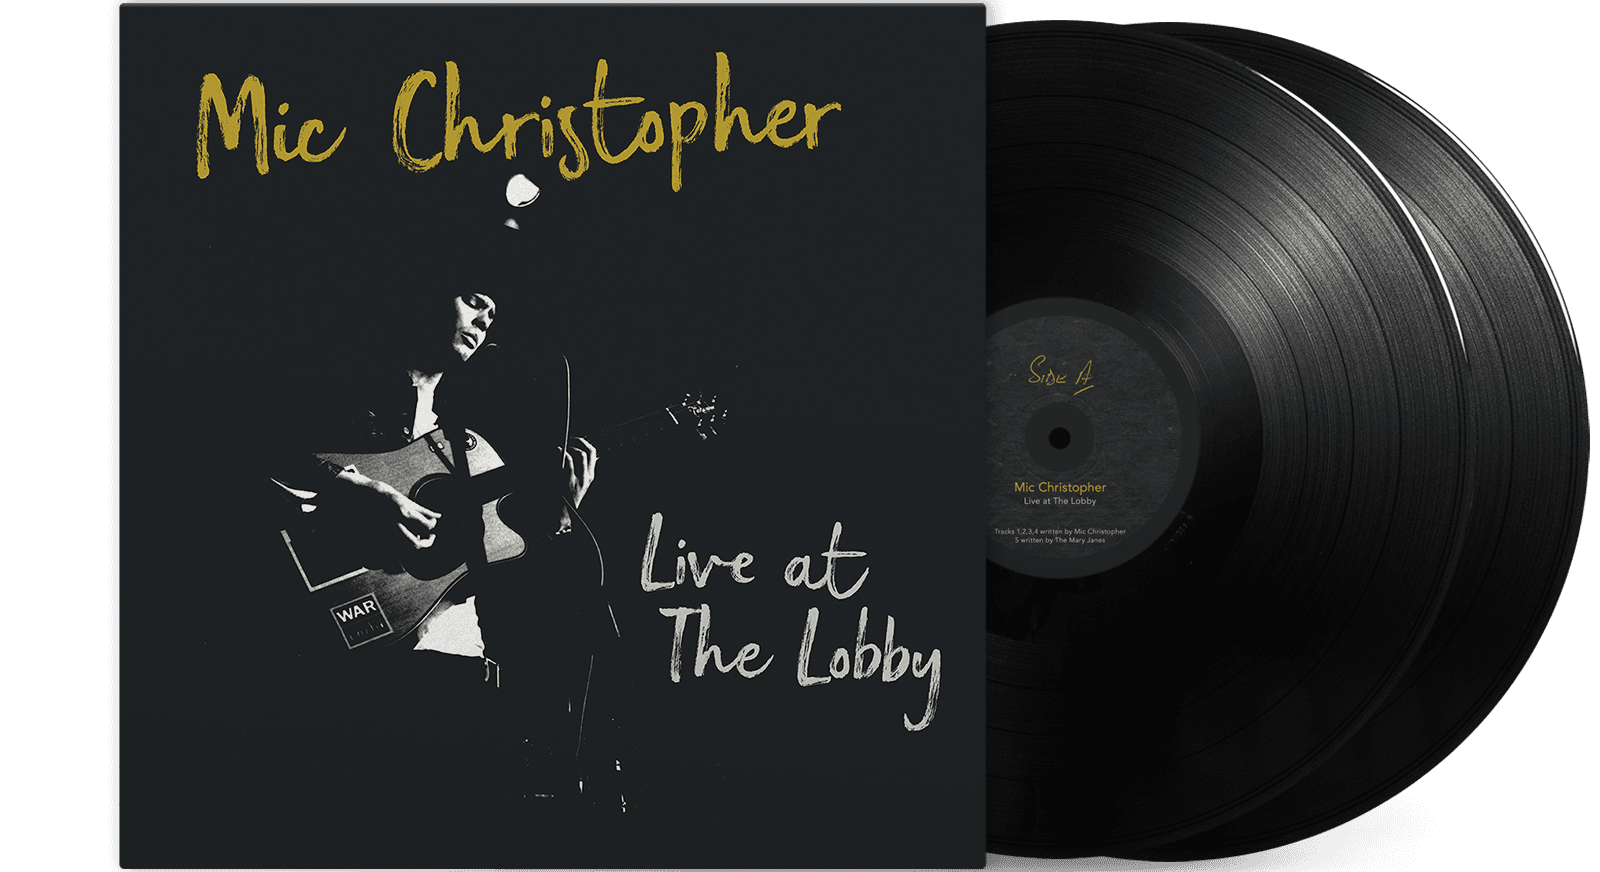 Mic Christopher - Live At The Lobby 2LP LTD Edition!! Out Now!